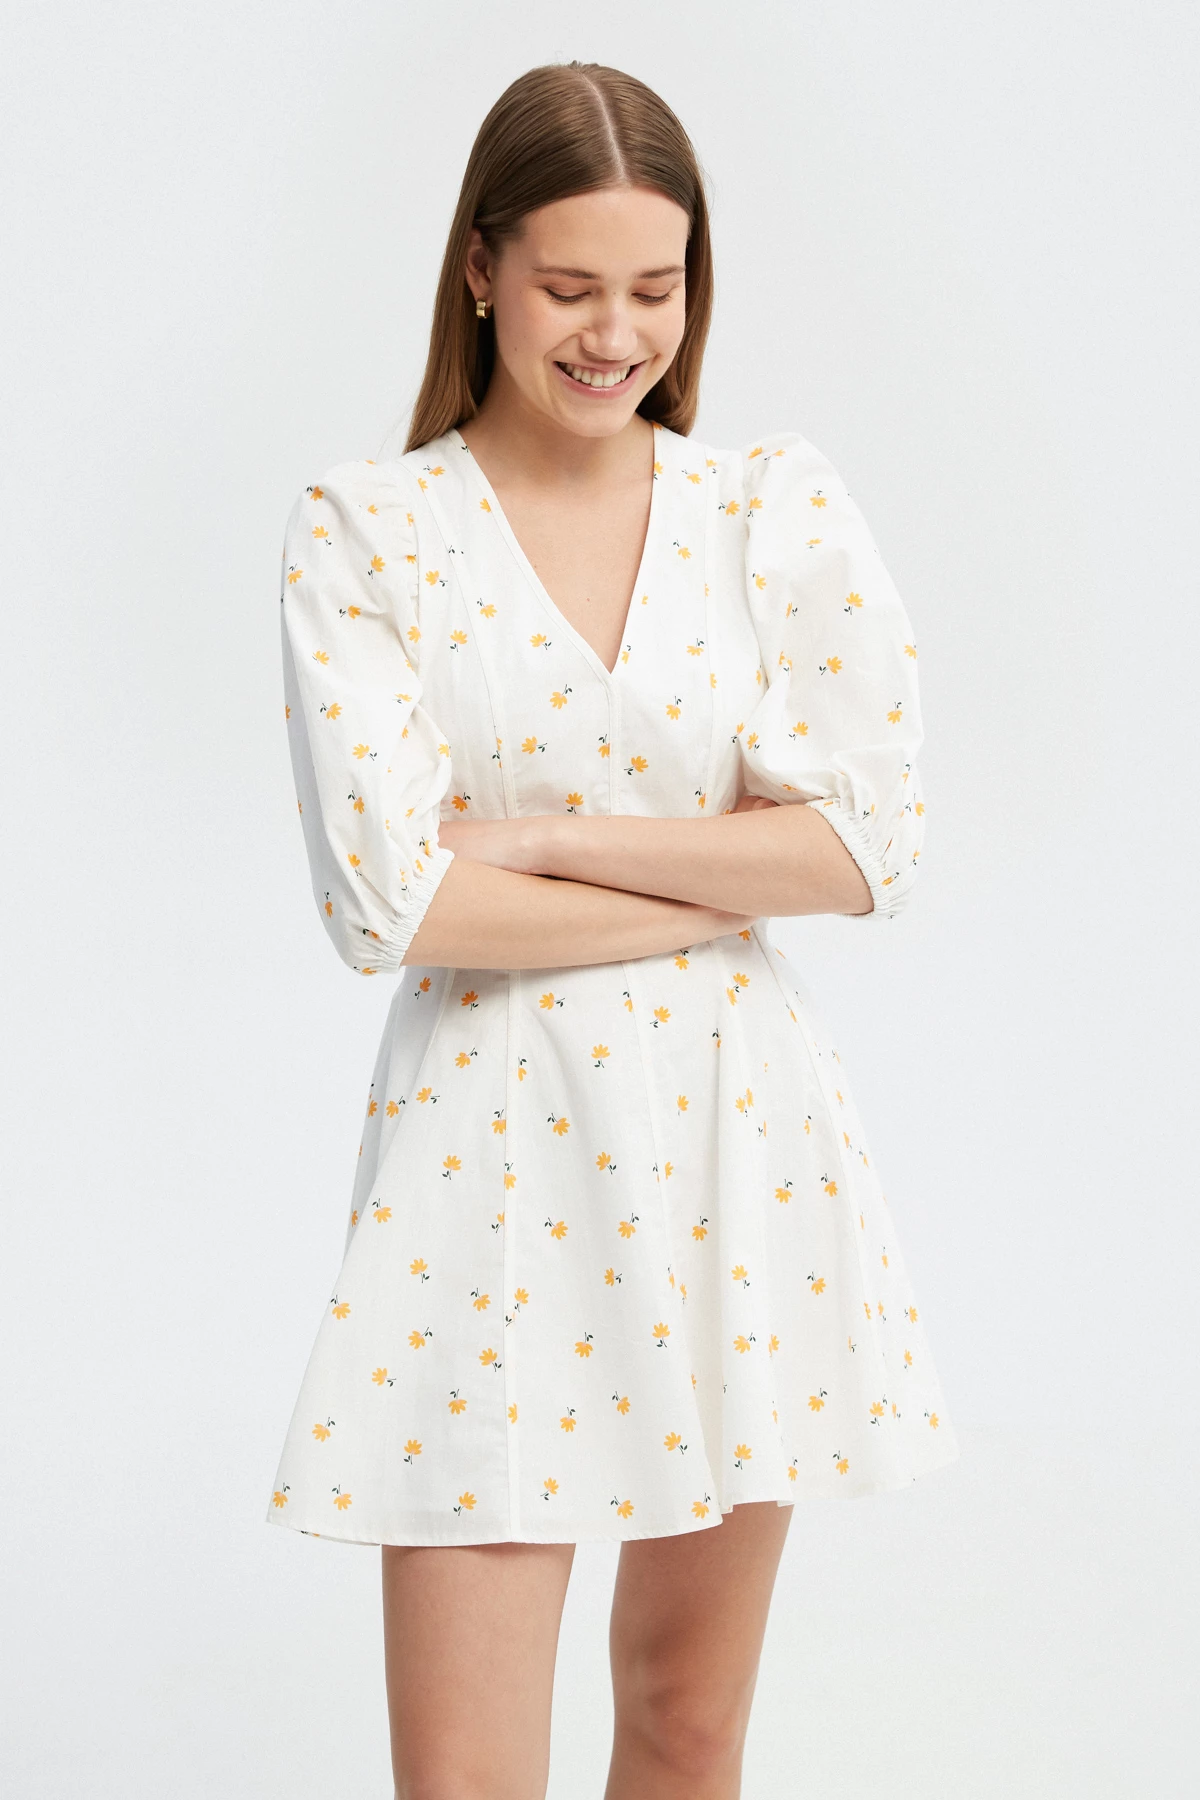 White short cotton dress with yellow flowers print, photo 2